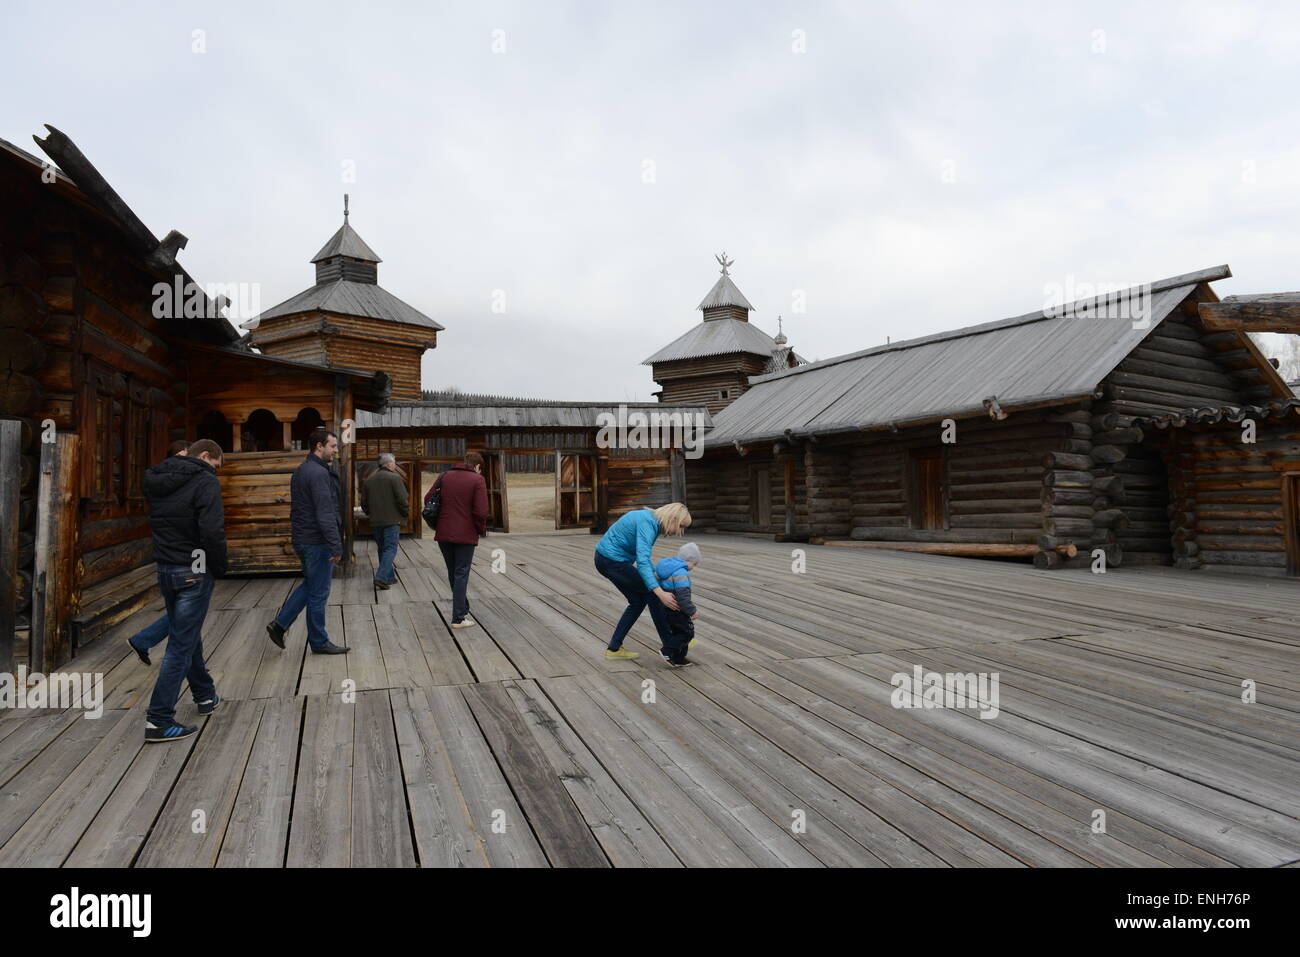 Old traditional Siberian wooden houses in the Taltsy Open-Air Museum near Irkutsk. Stock Photo